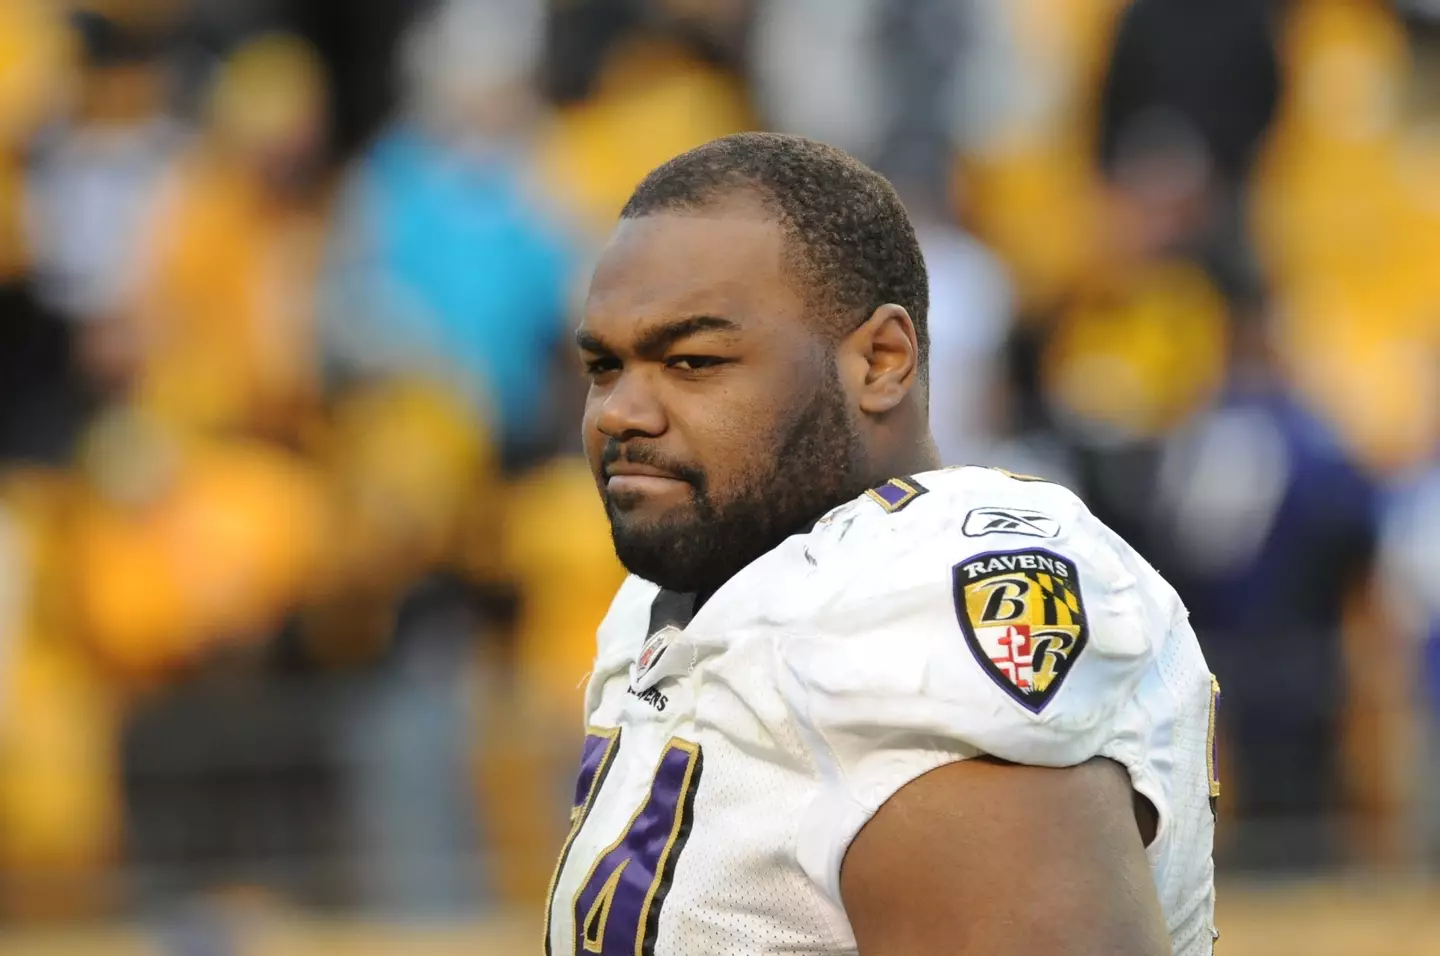 Michael Oher launched a lawsuit against the Tuhoy family.